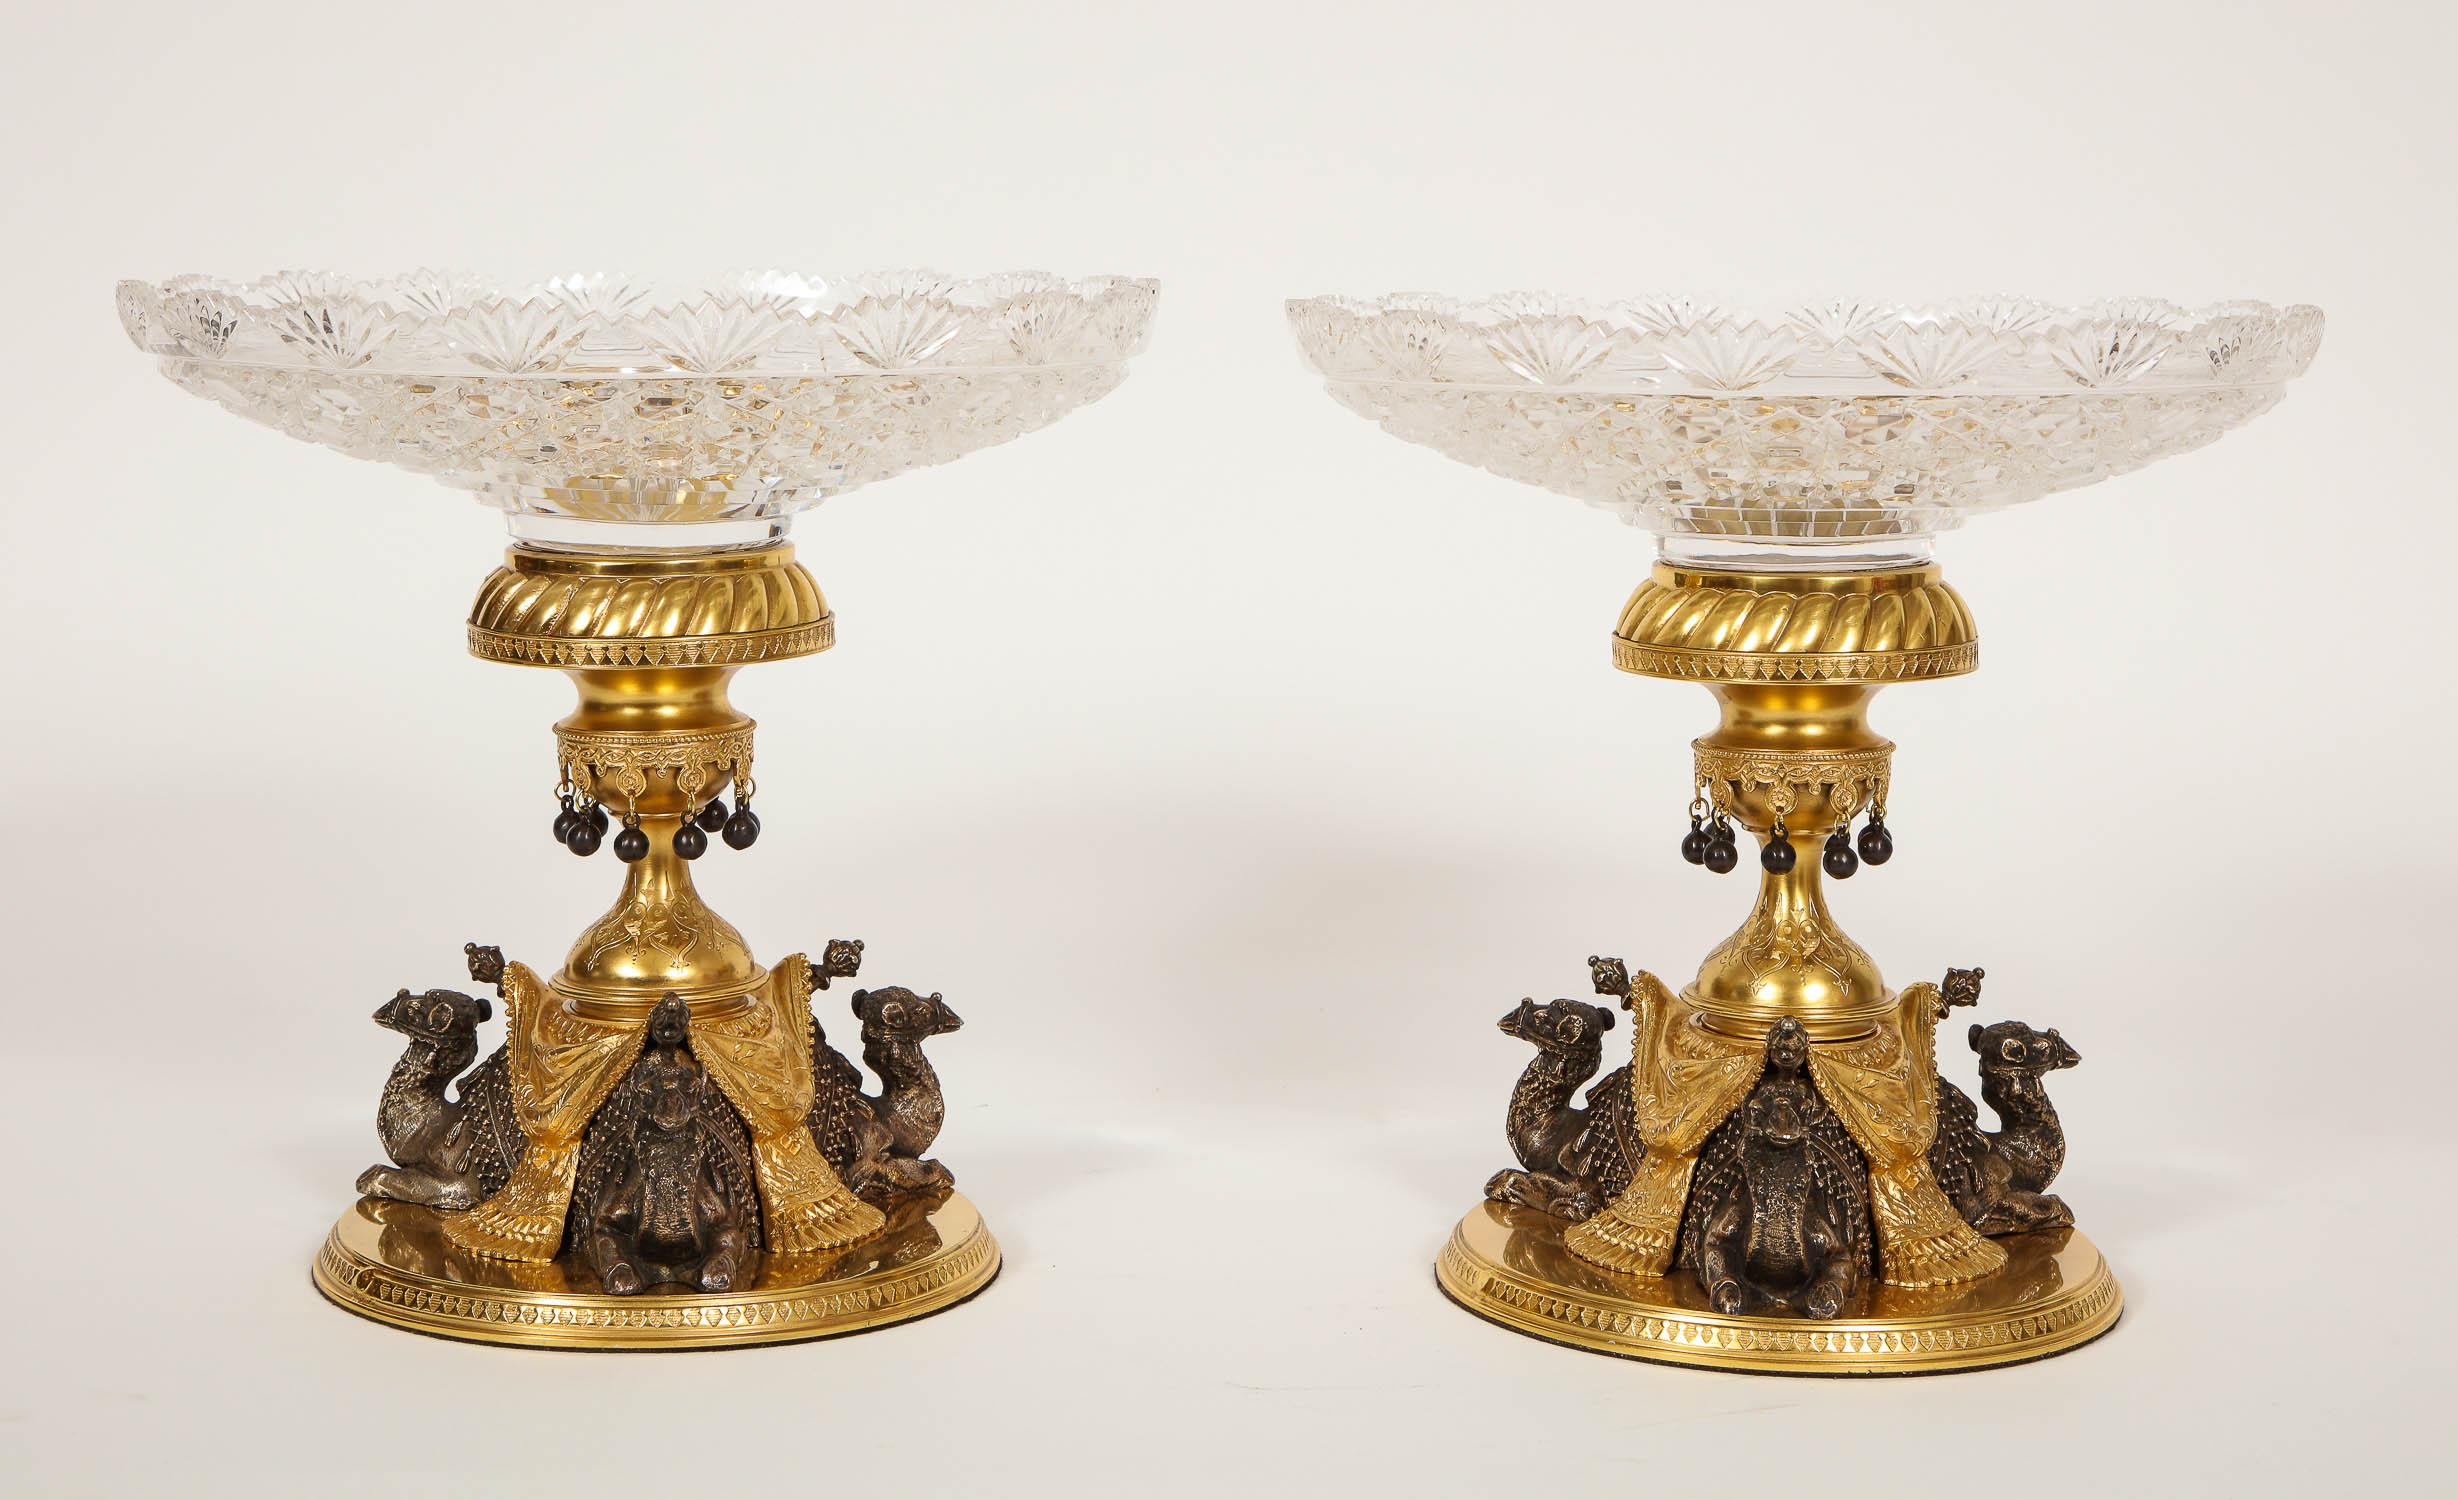 Pair of English Doré & Silvered Bronze Camel Centrepieces for Orientalist Market In Excellent Condition For Sale In New York, NY